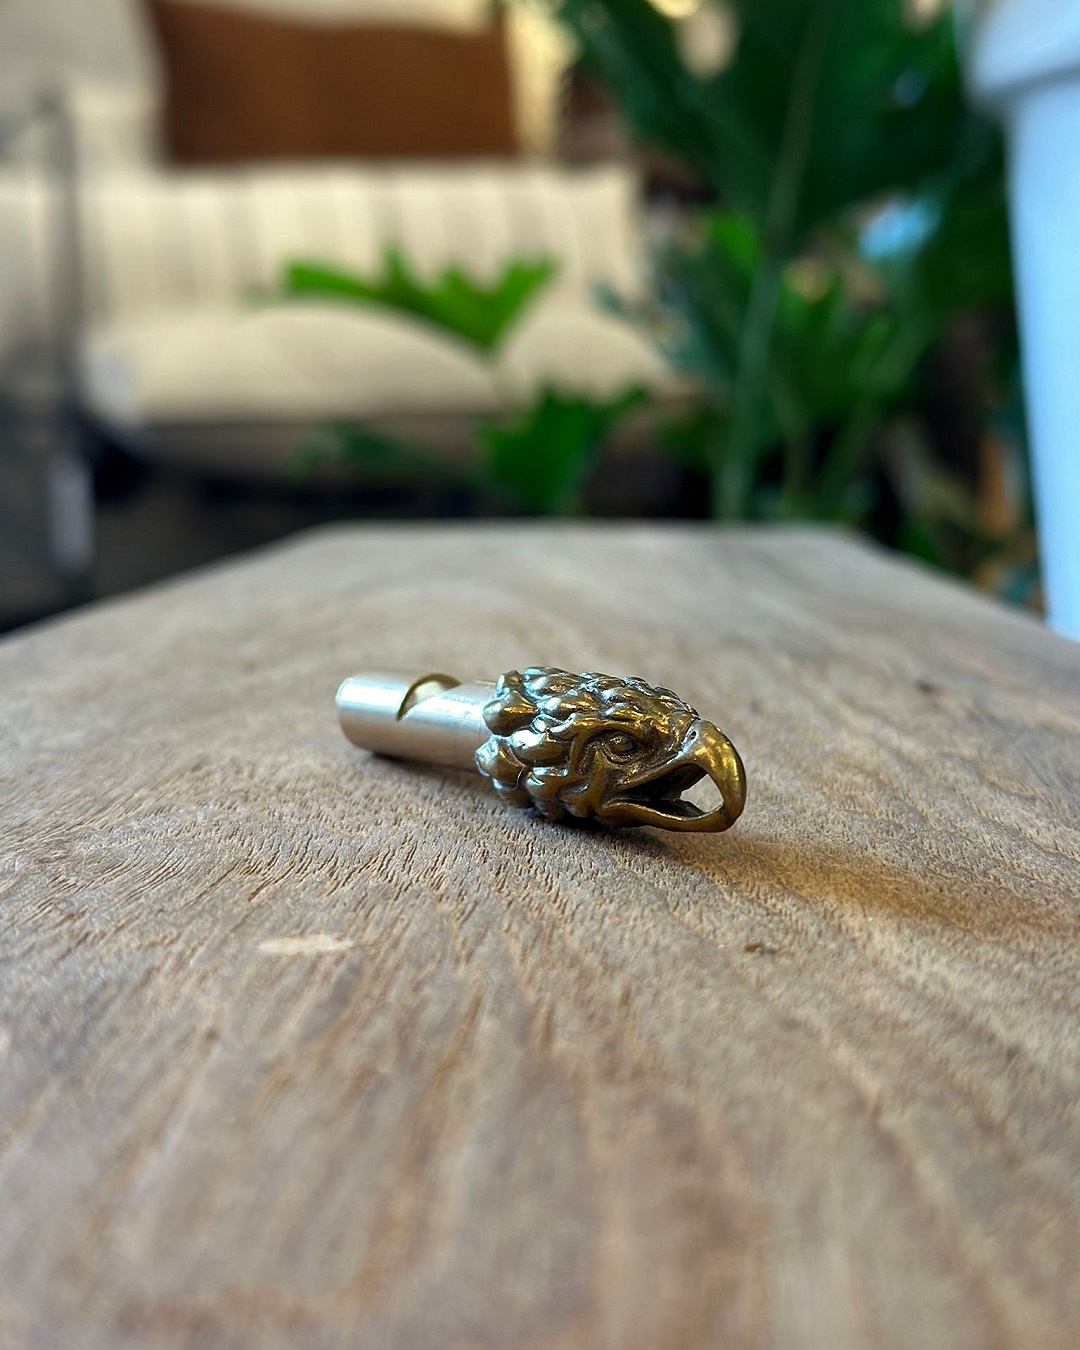 Gold eagle keyring on a table